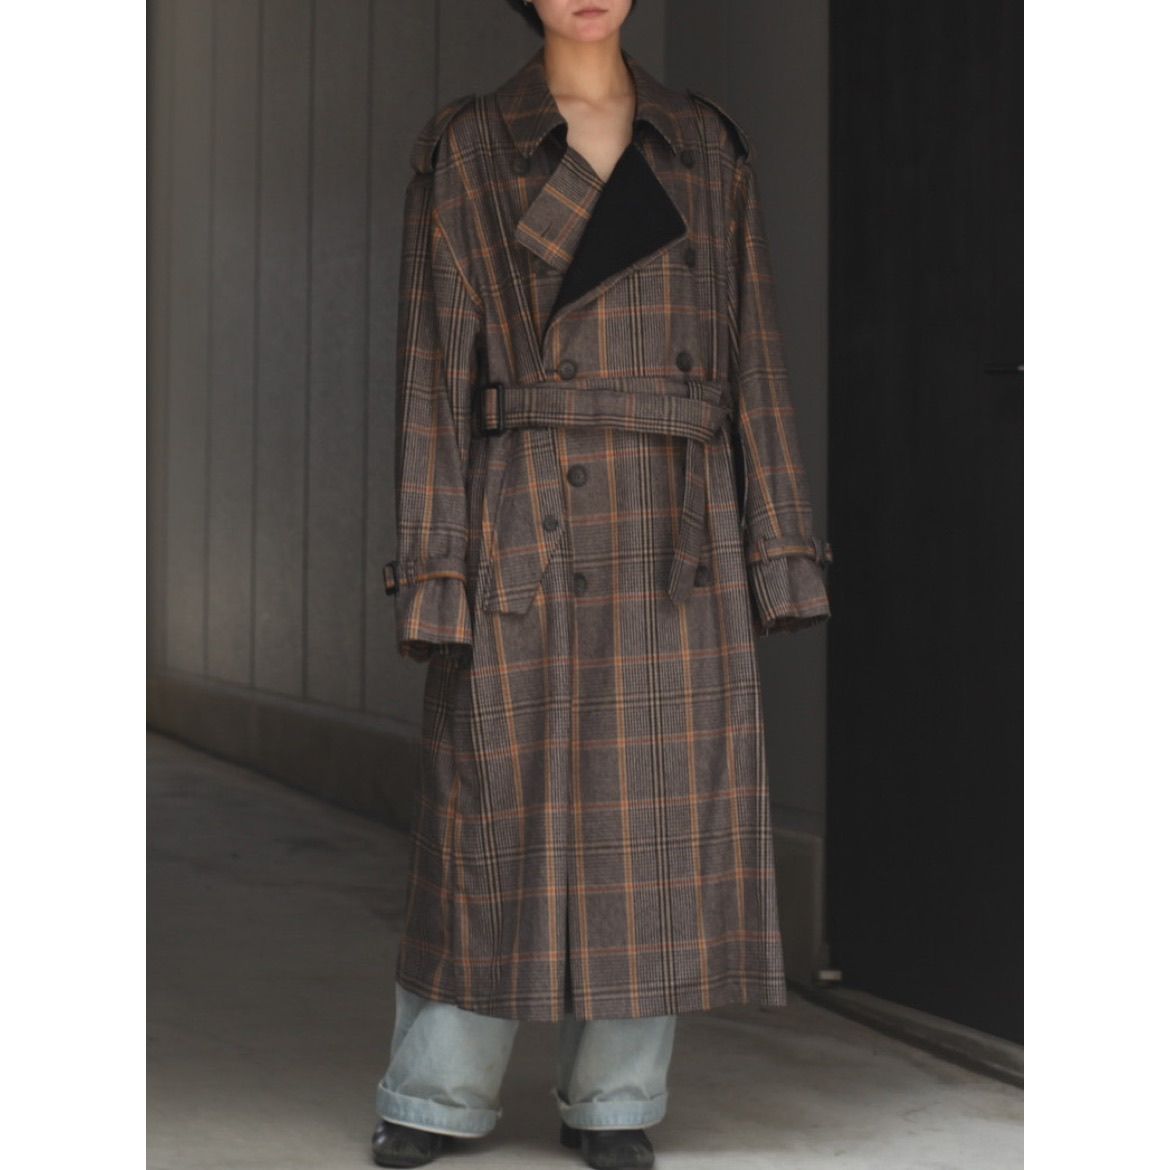 stein - 【残りわずか】Oversized Double Lapeled Trench Coat 